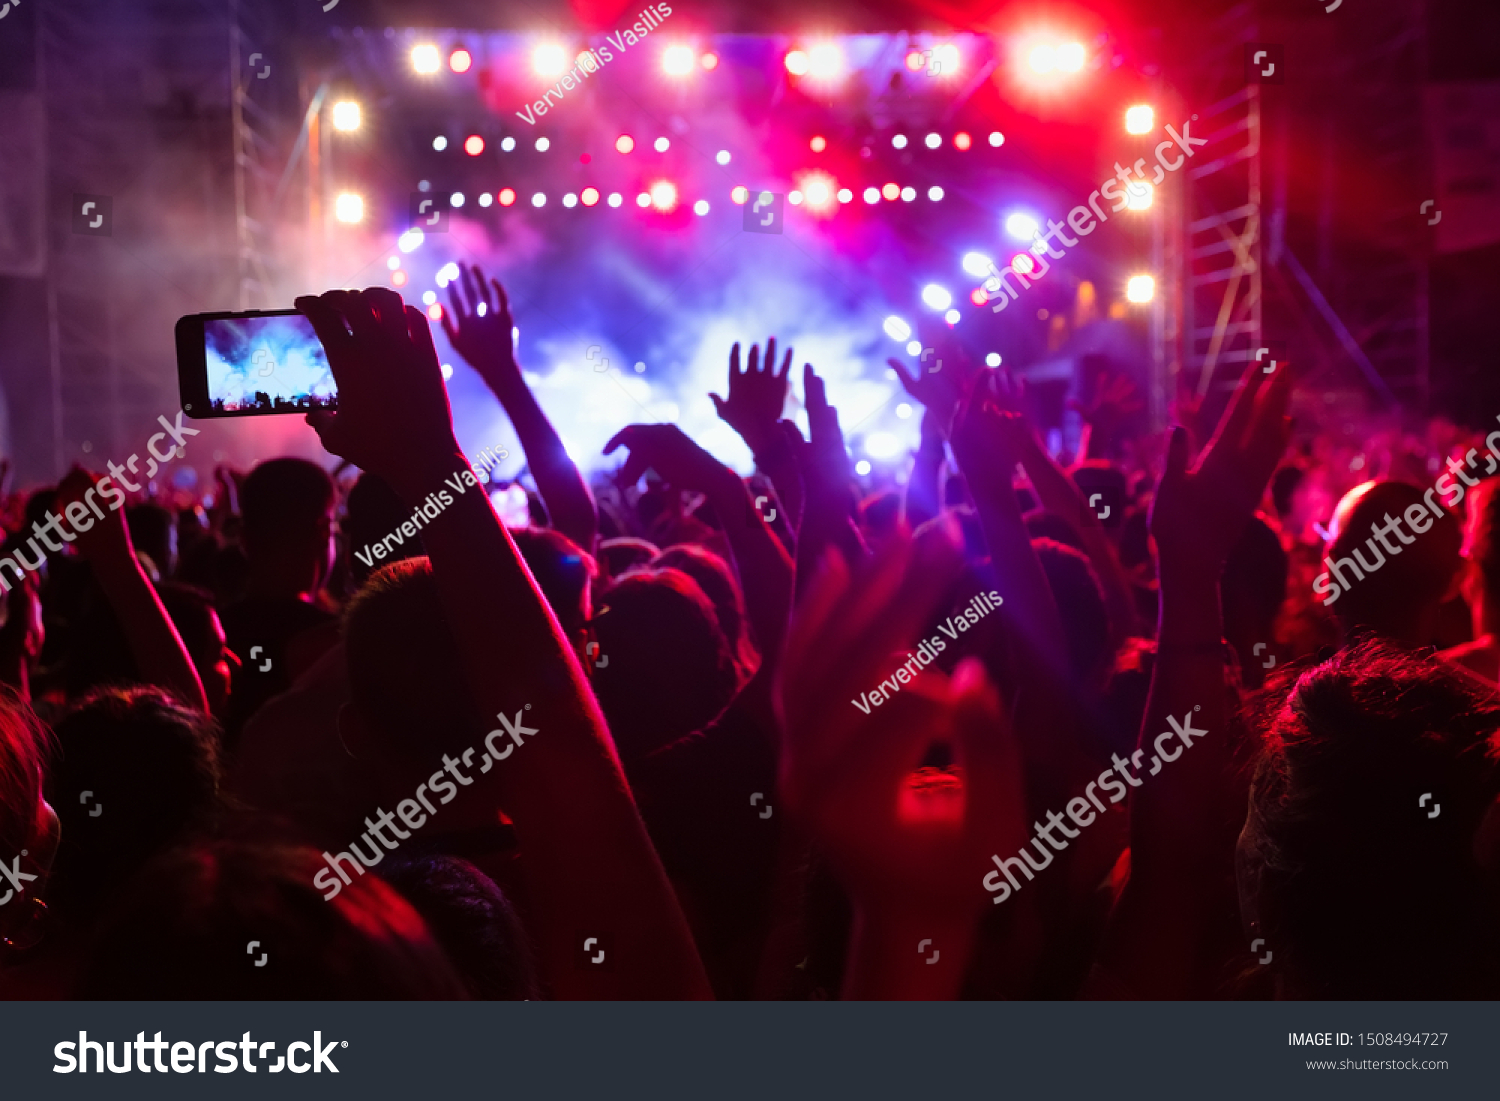 People taking photographs with smart phone during a public music concert #1508494727